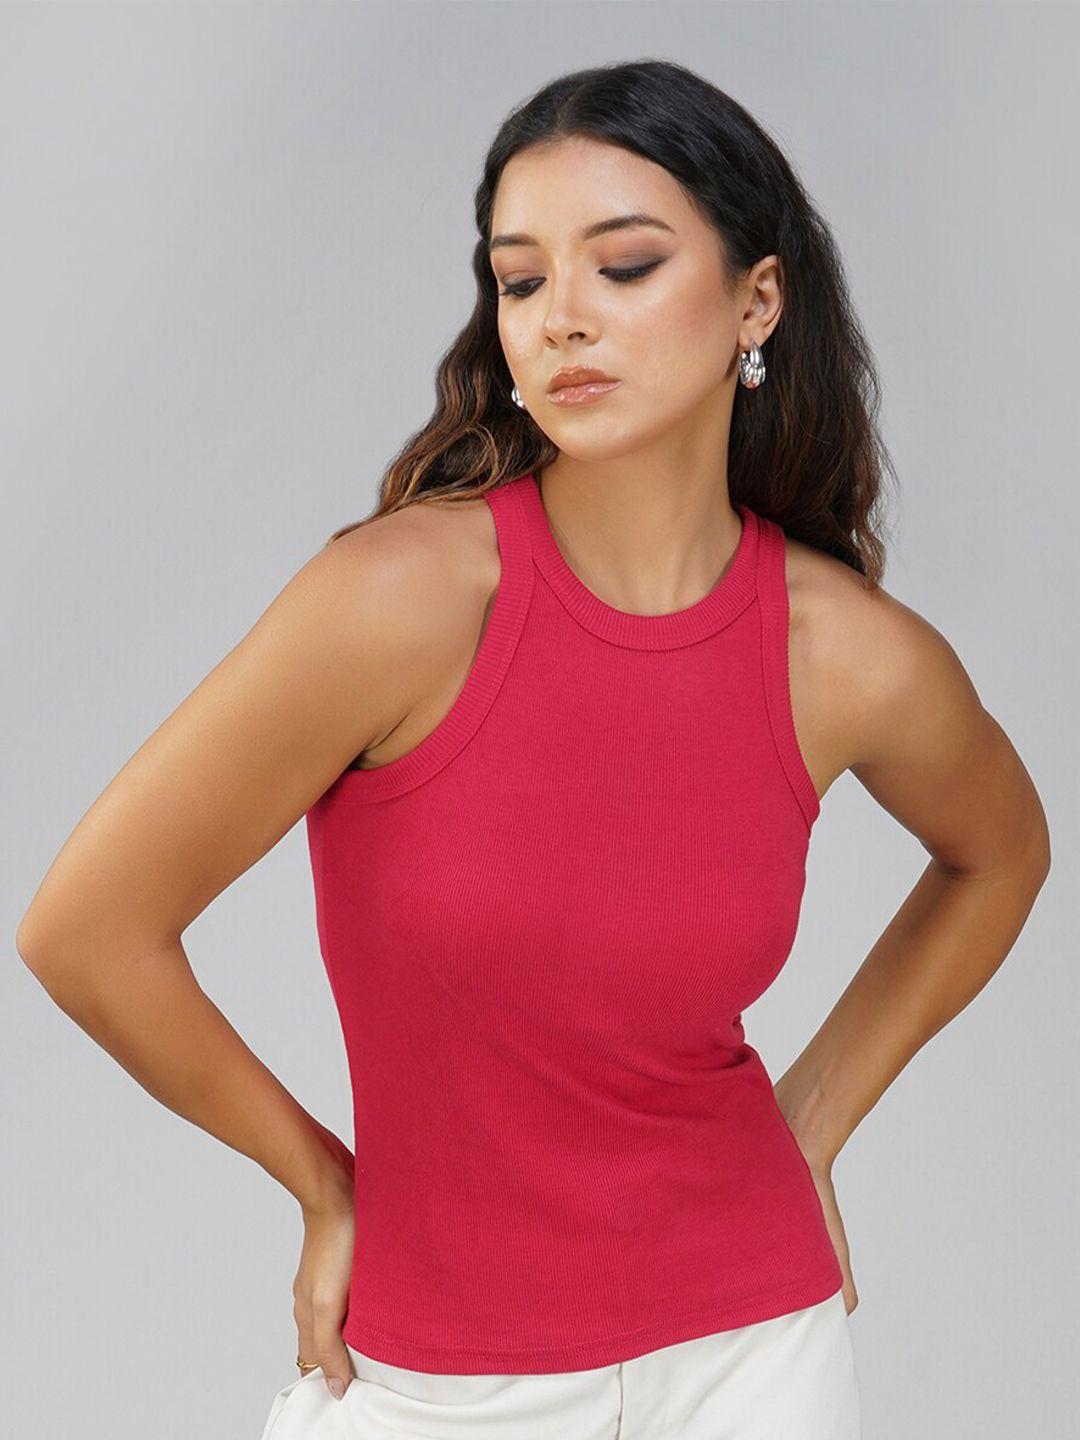 lagashi ribbed cotton fitted top